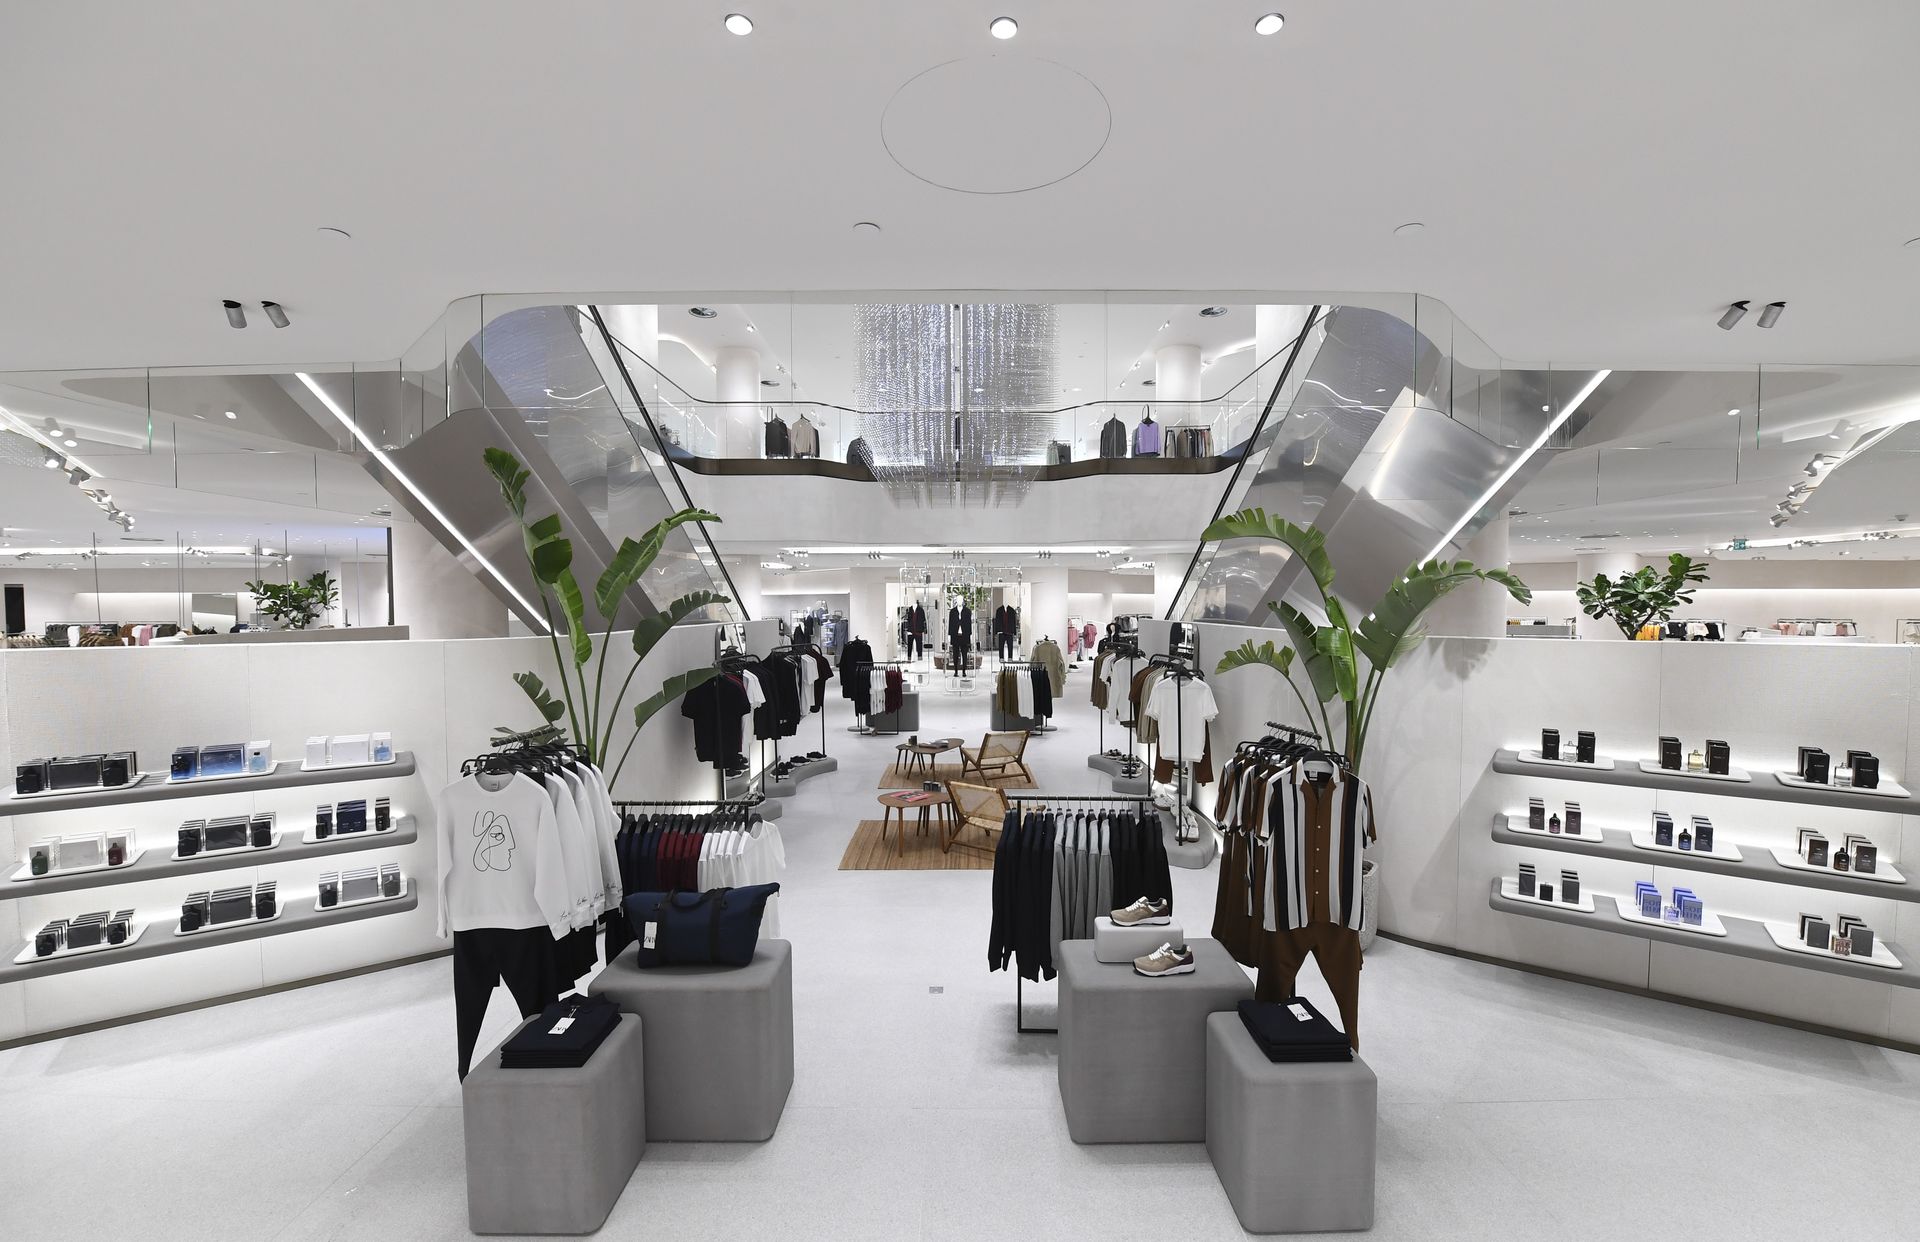 In pictures: Zara unveils first click-and-collect store | Photo gallery ...